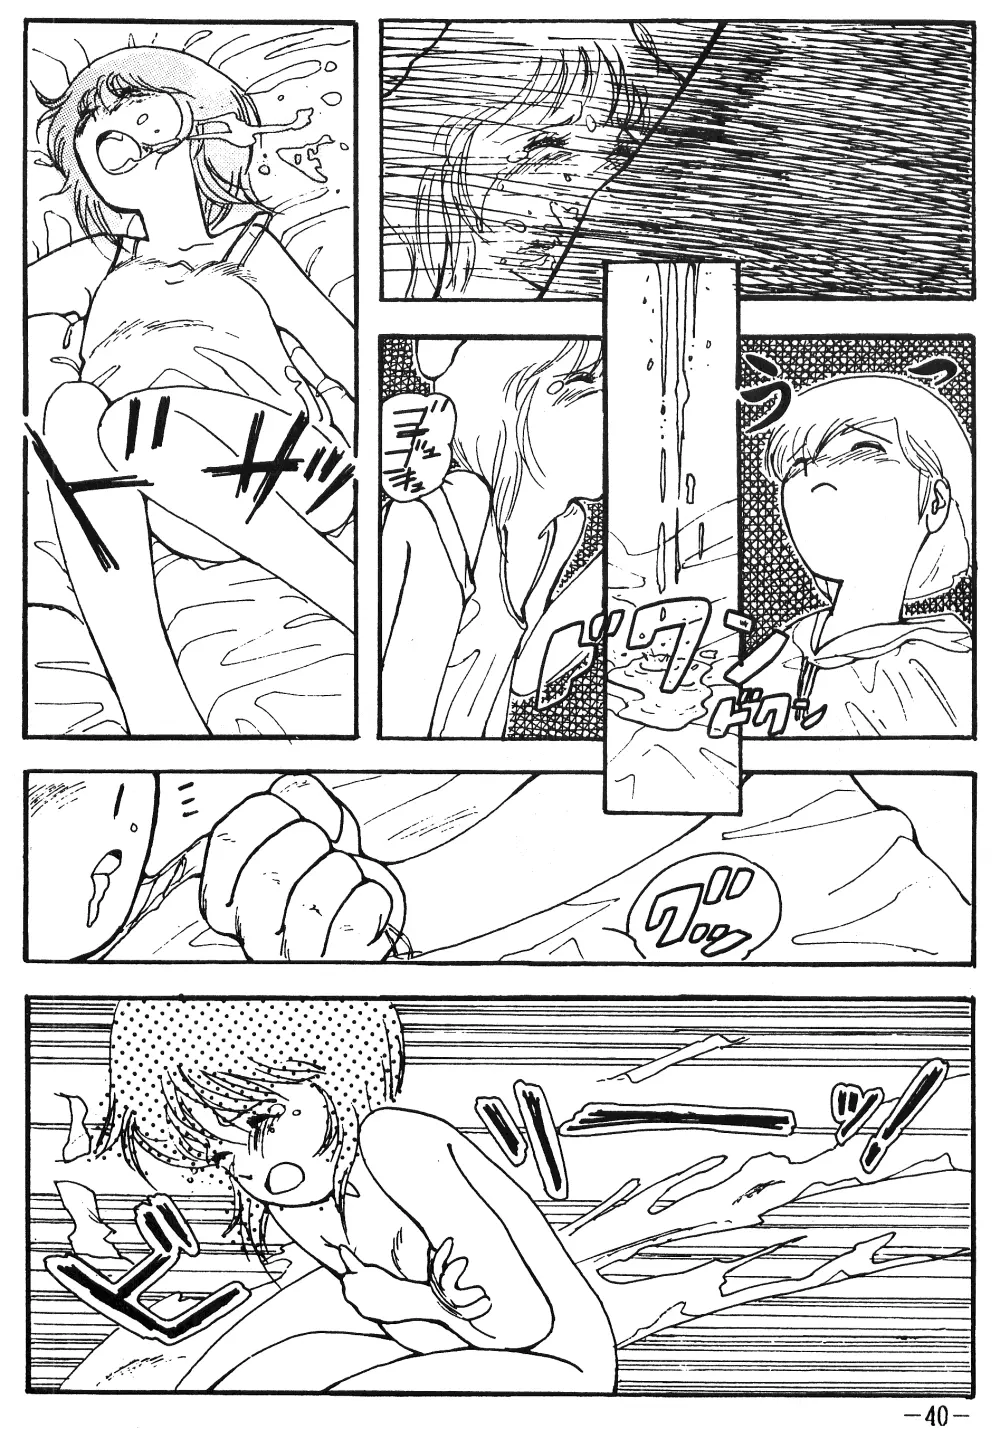 Fro2 Fight Vol. 1 Page.40